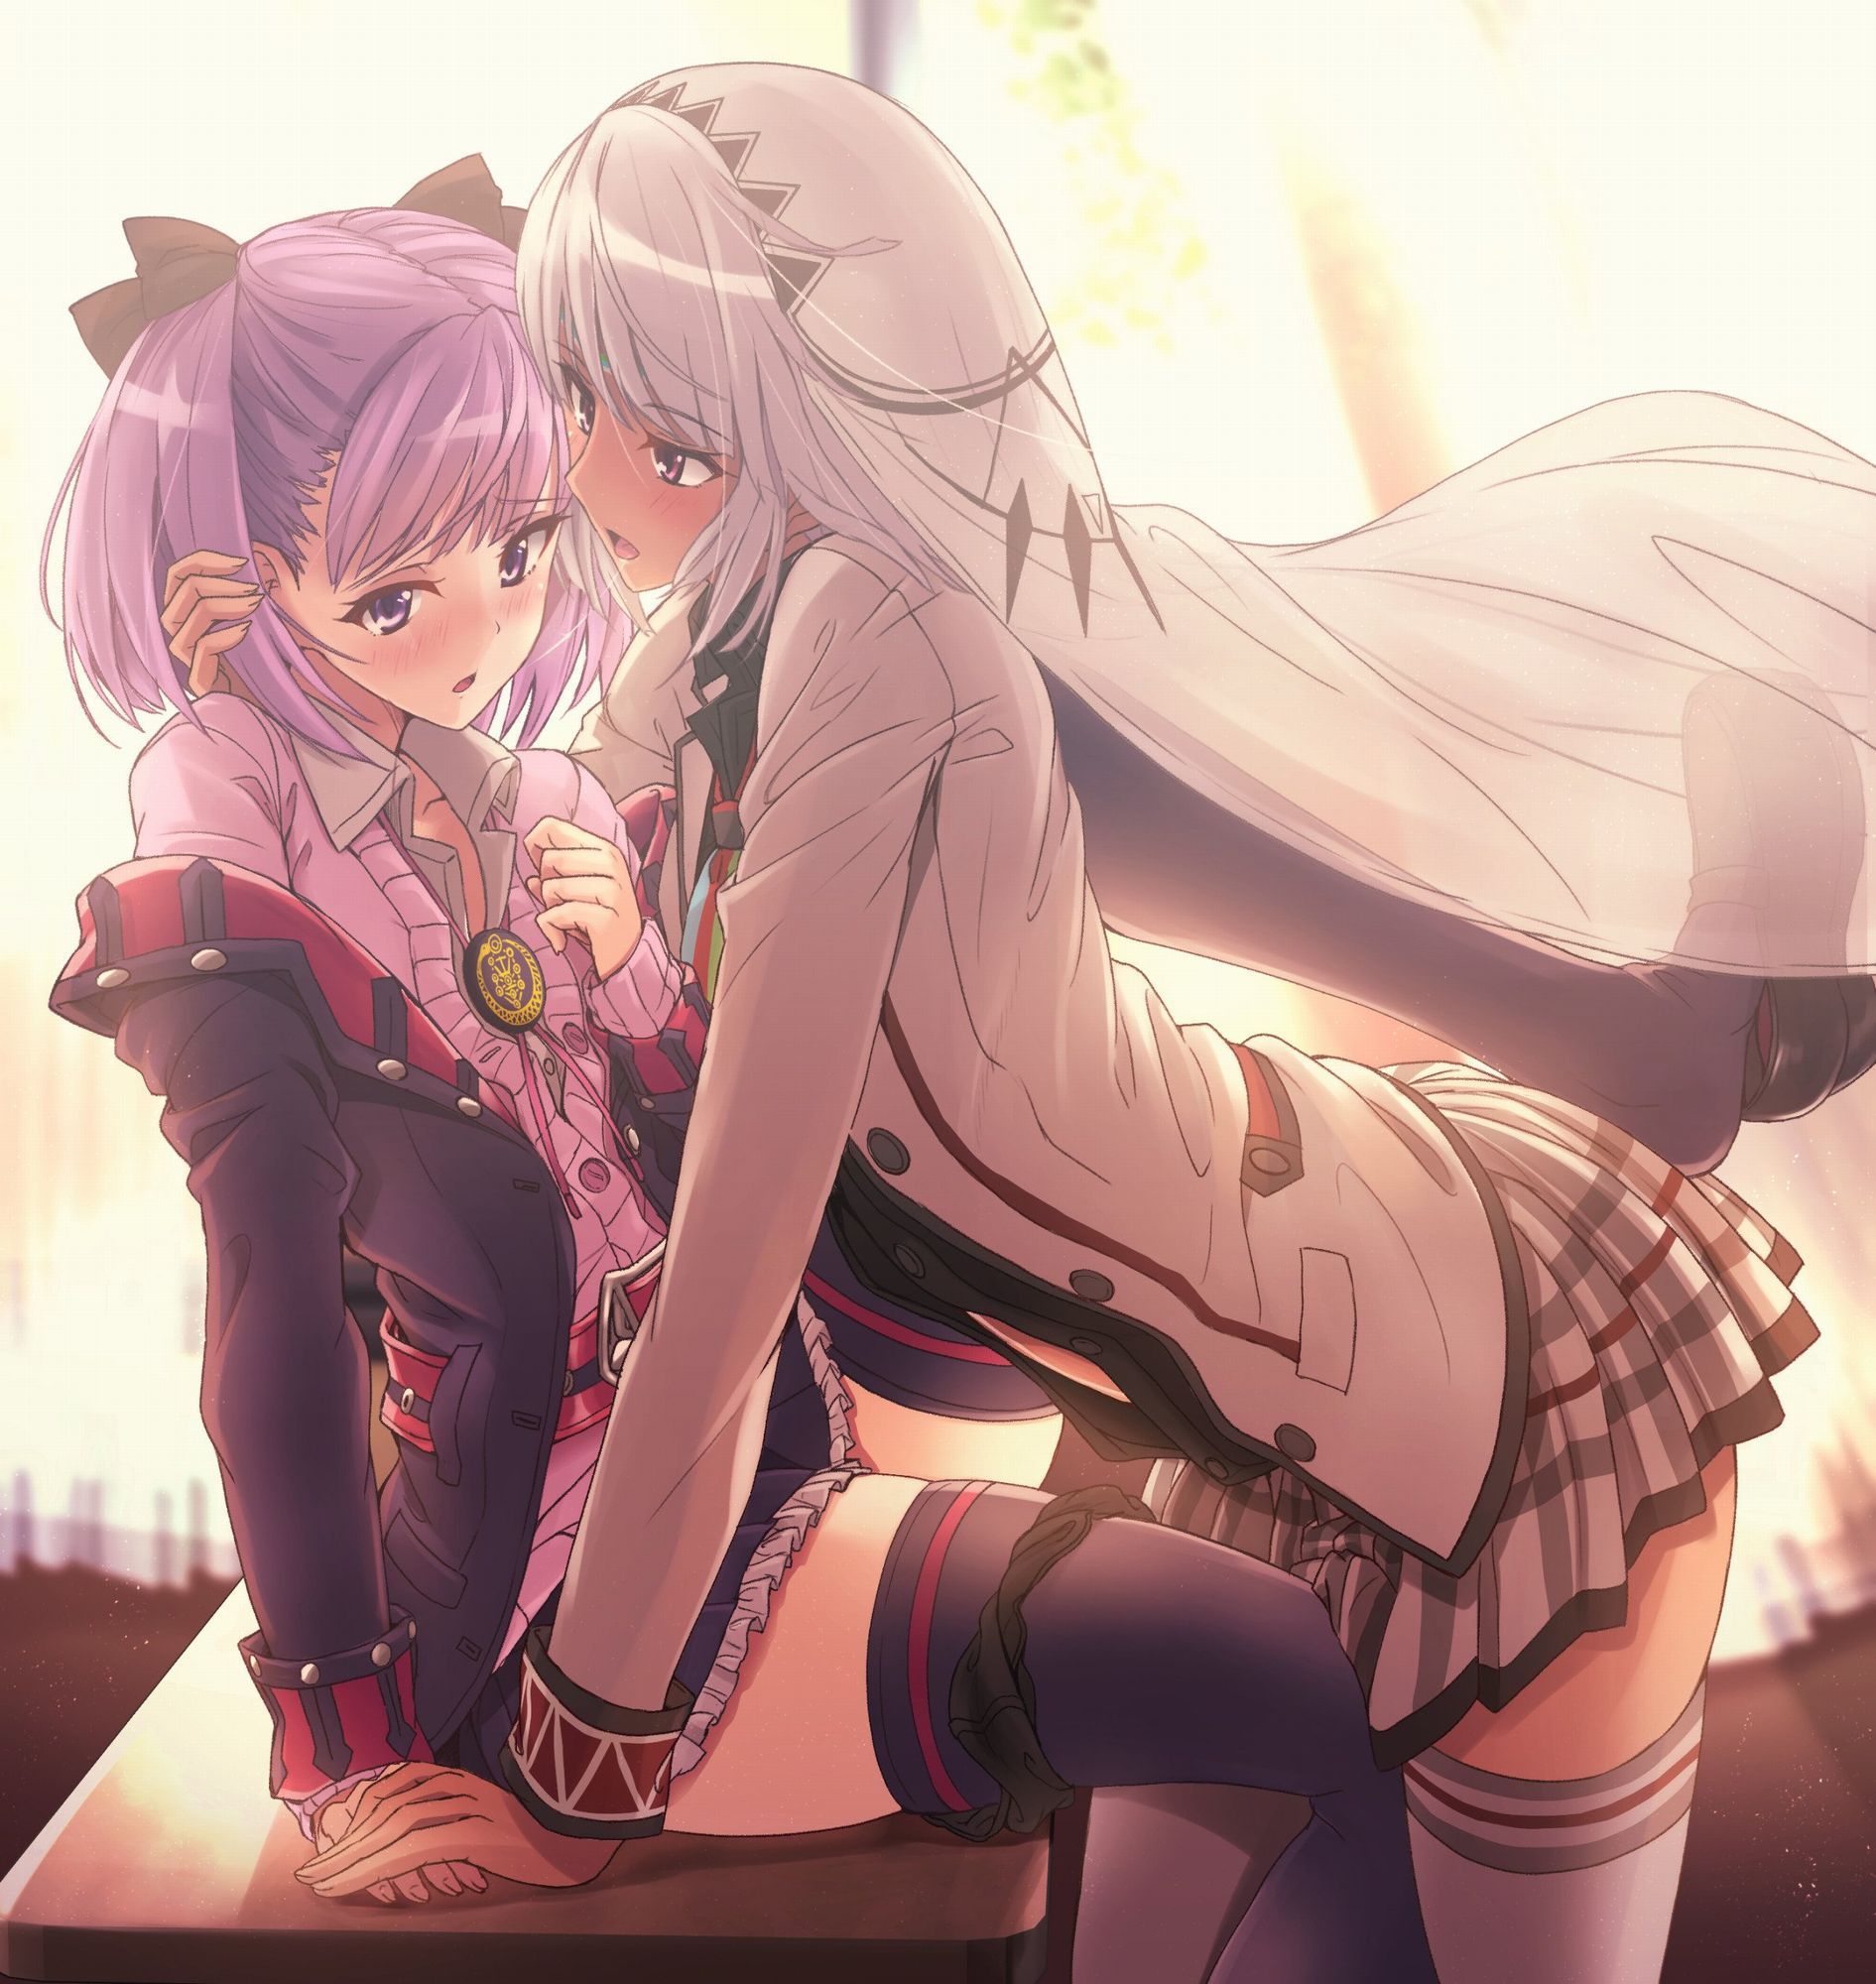 【Erotic Anime Summary】 The cutest erotic images of lesbian girls 【Secondary erotica】 22